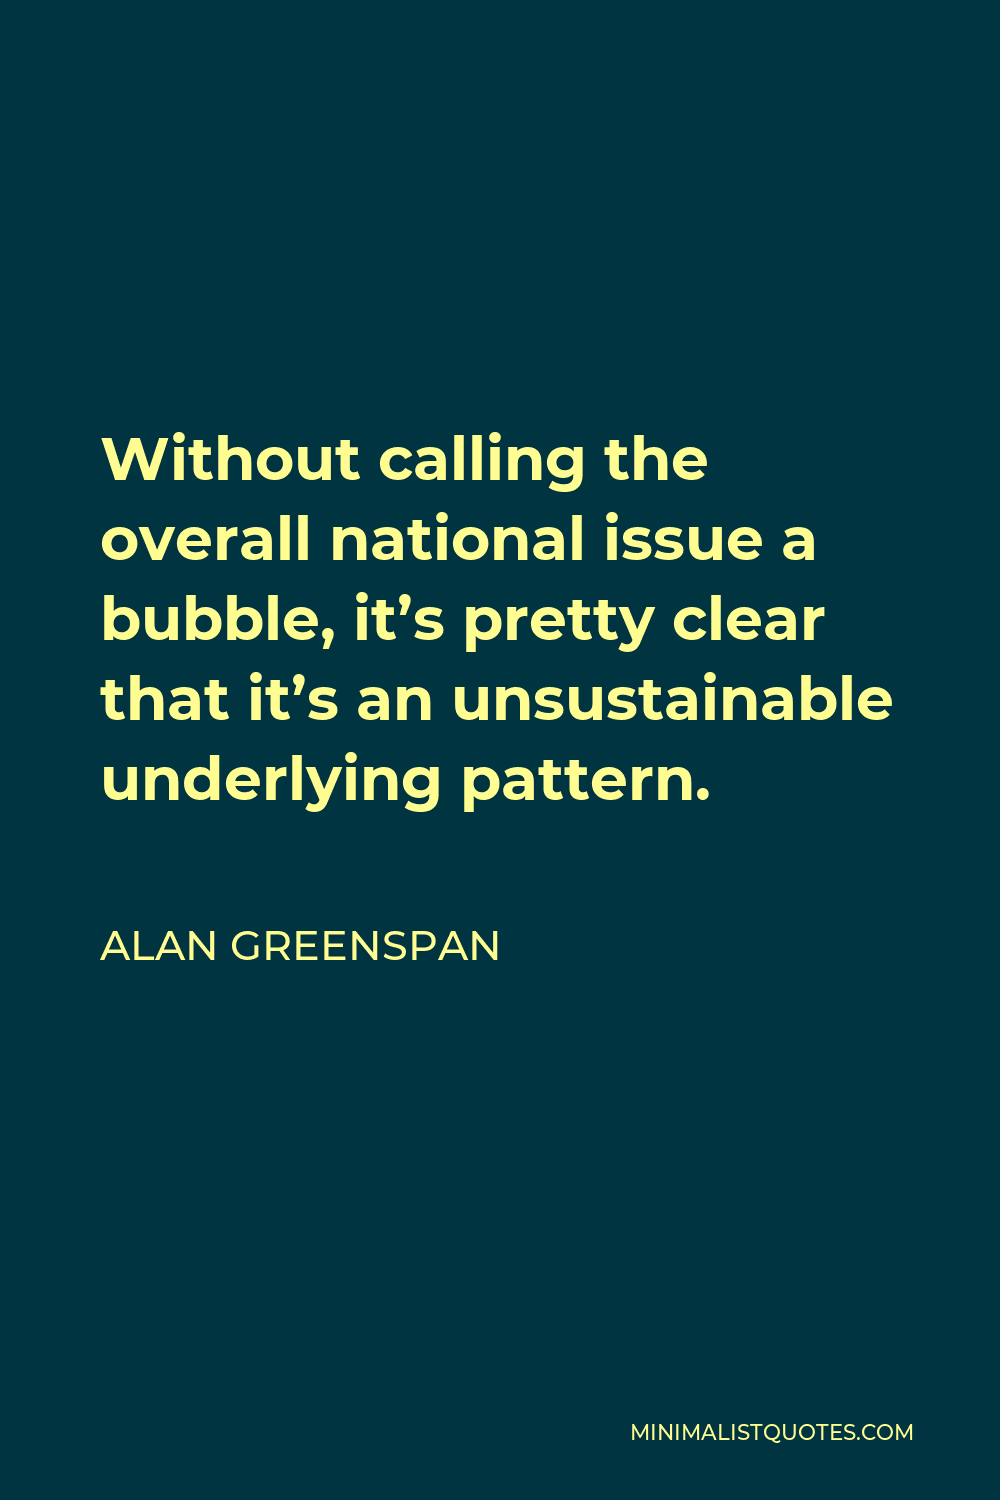 Alan Greenspan Quote - Without calling the overall national issue a bubble, it’s pretty clear that it’s an unsustainable underlying pattern.